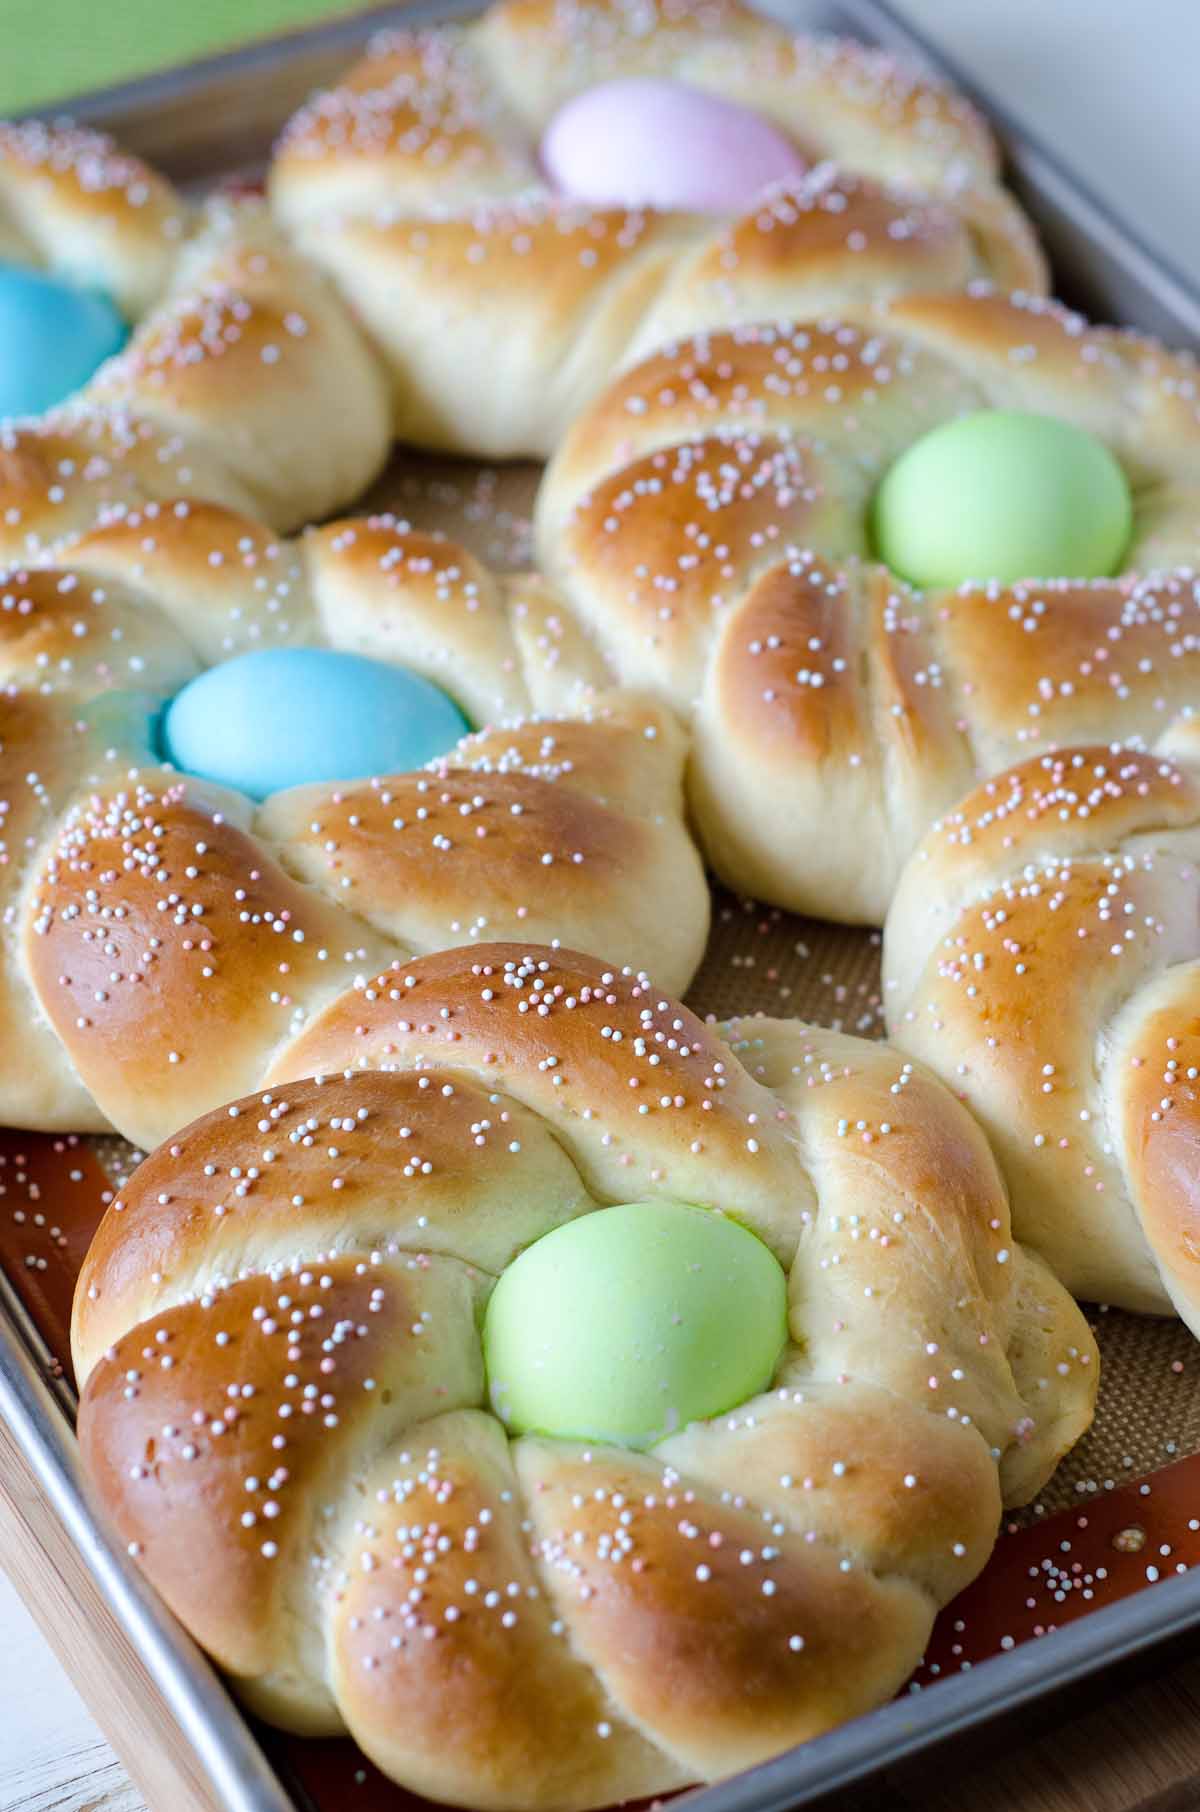 Italian Easter Bread | How to make Easter bread | EASY recipe + VIDEO